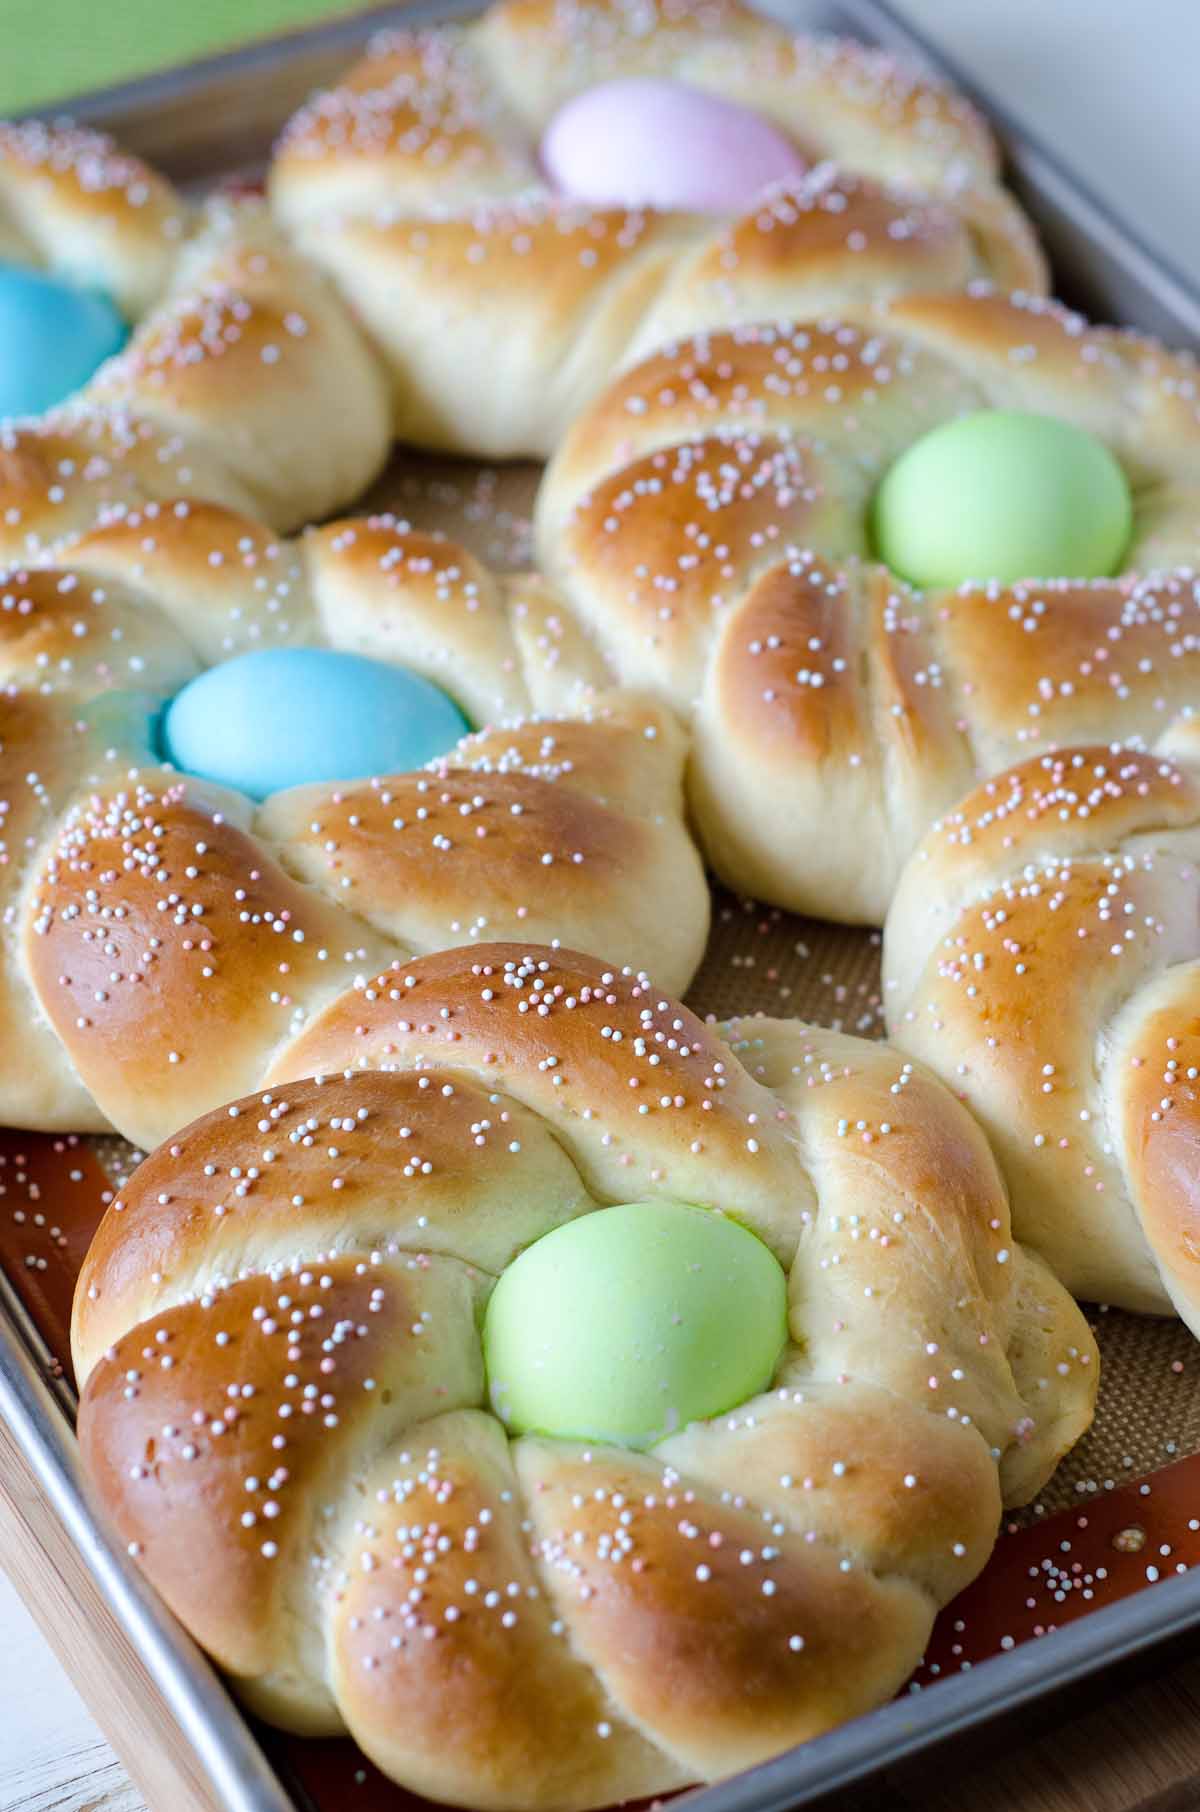 Italian Easter Bread | How to make Easter bread | EASY recipe + VIDEO